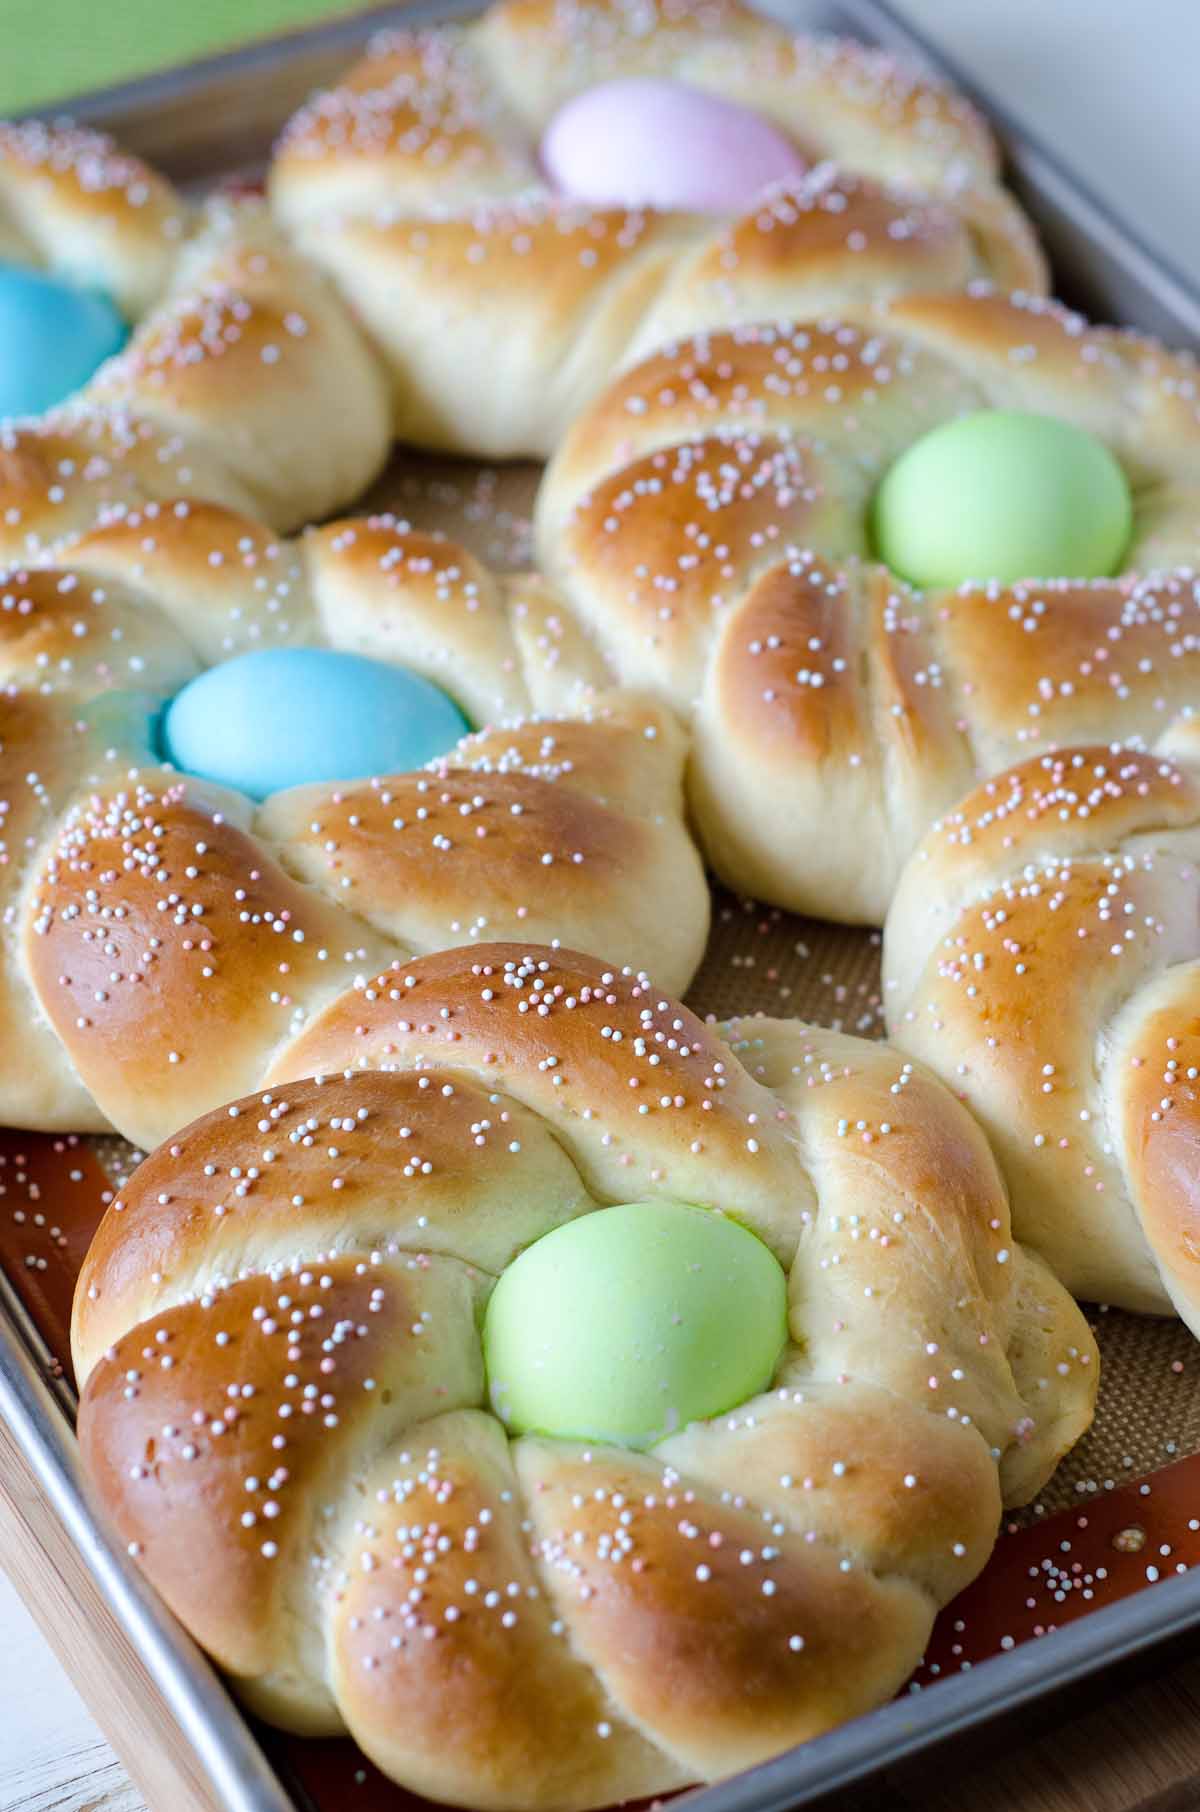 Italian Easter Bread | How to make Easter bread | EASY recipe + VIDEO